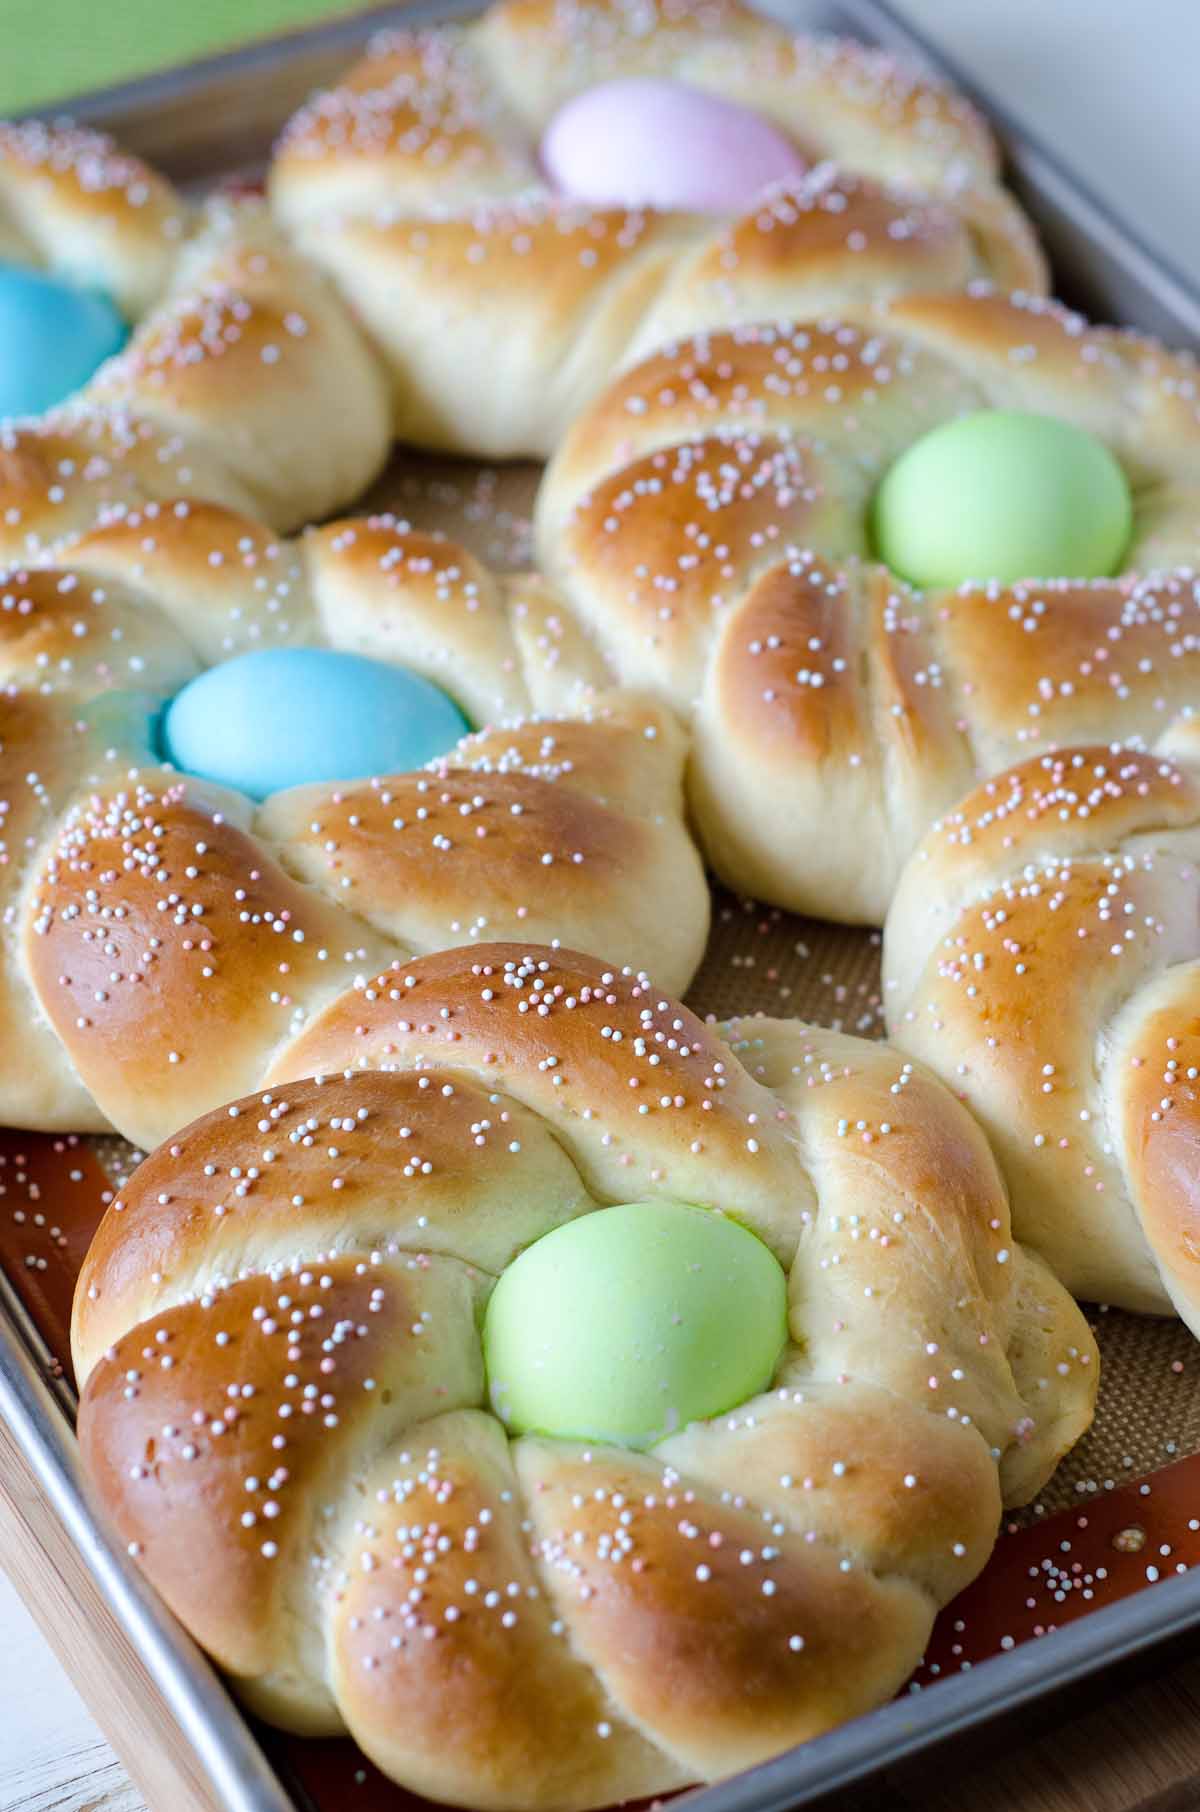 Italian Easter Bread | How to make Easter bread | EASY recipe + VIDEO